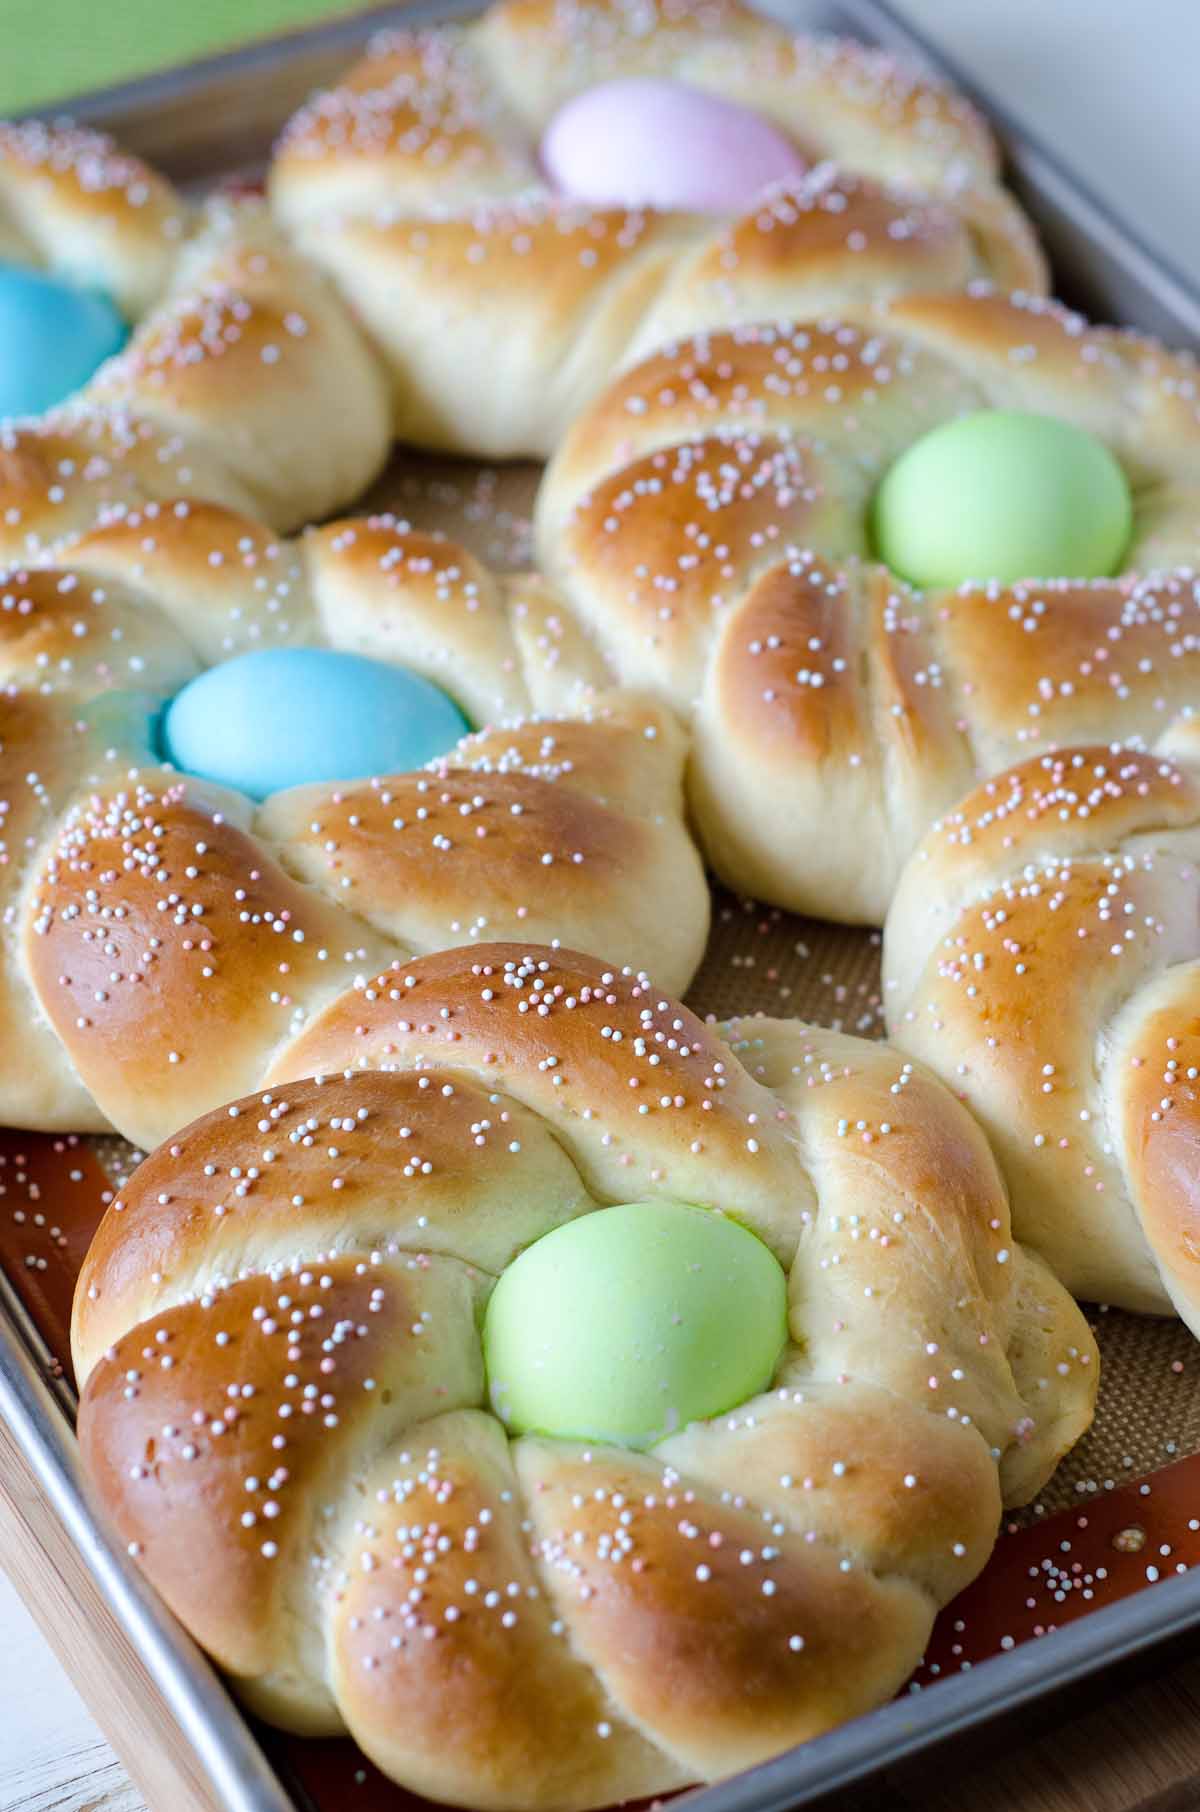 Italian Easter Bread | How to make Easter bread | EASY recipe + VIDEO